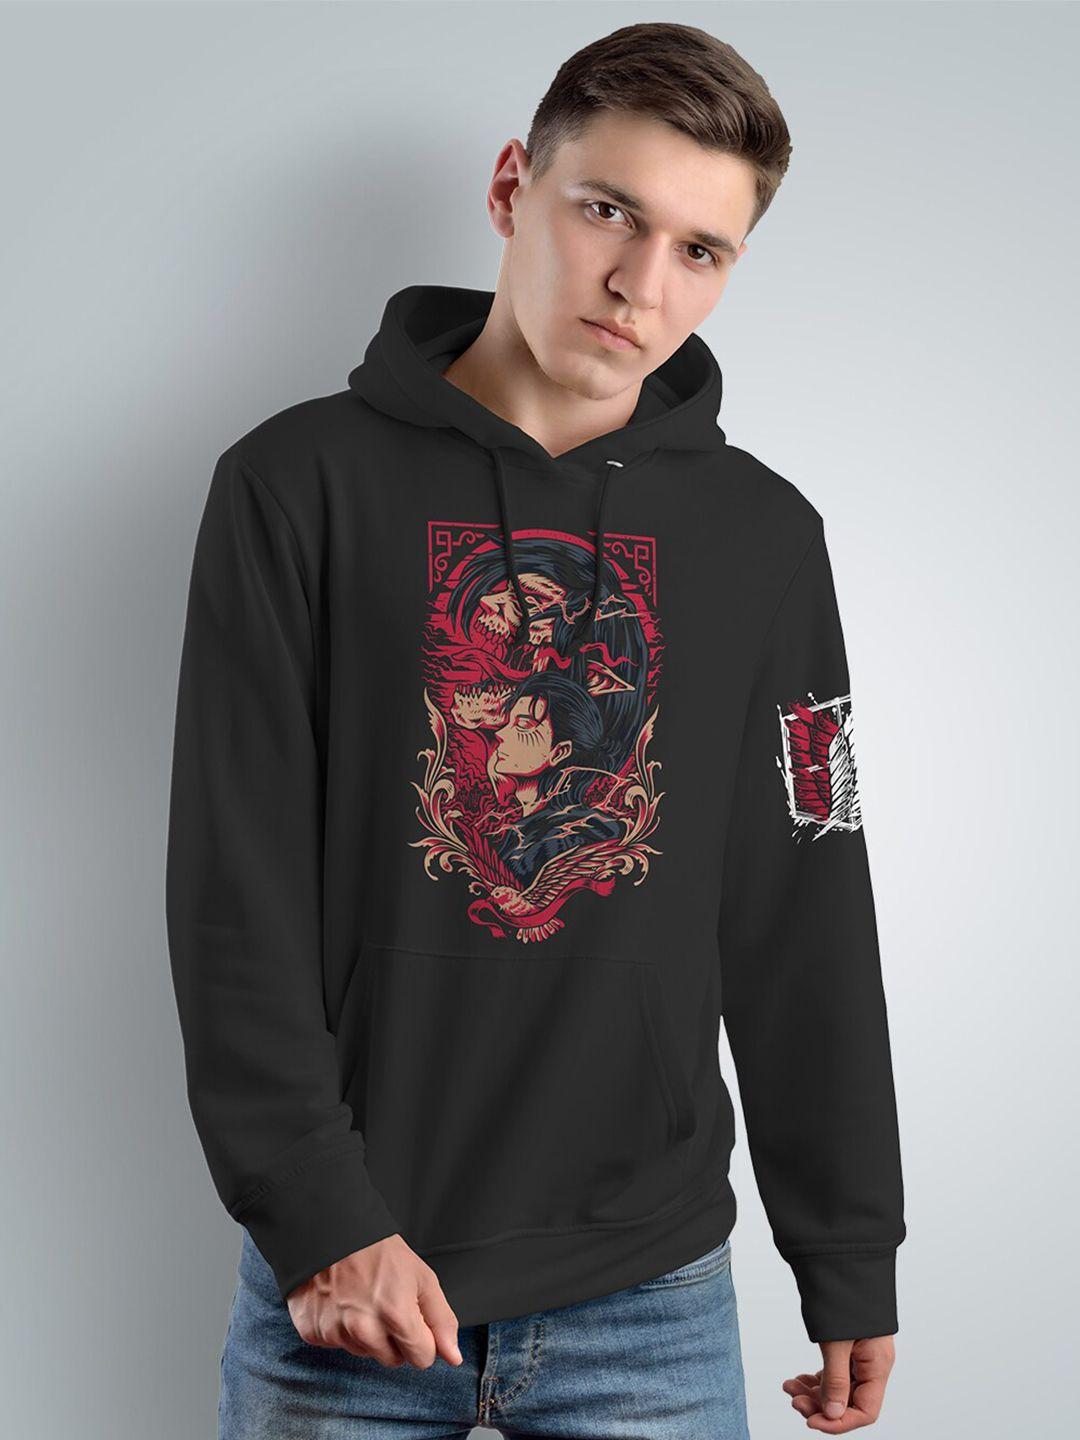 crazymonk eren yeager x freedom printed hooded cotton pullover